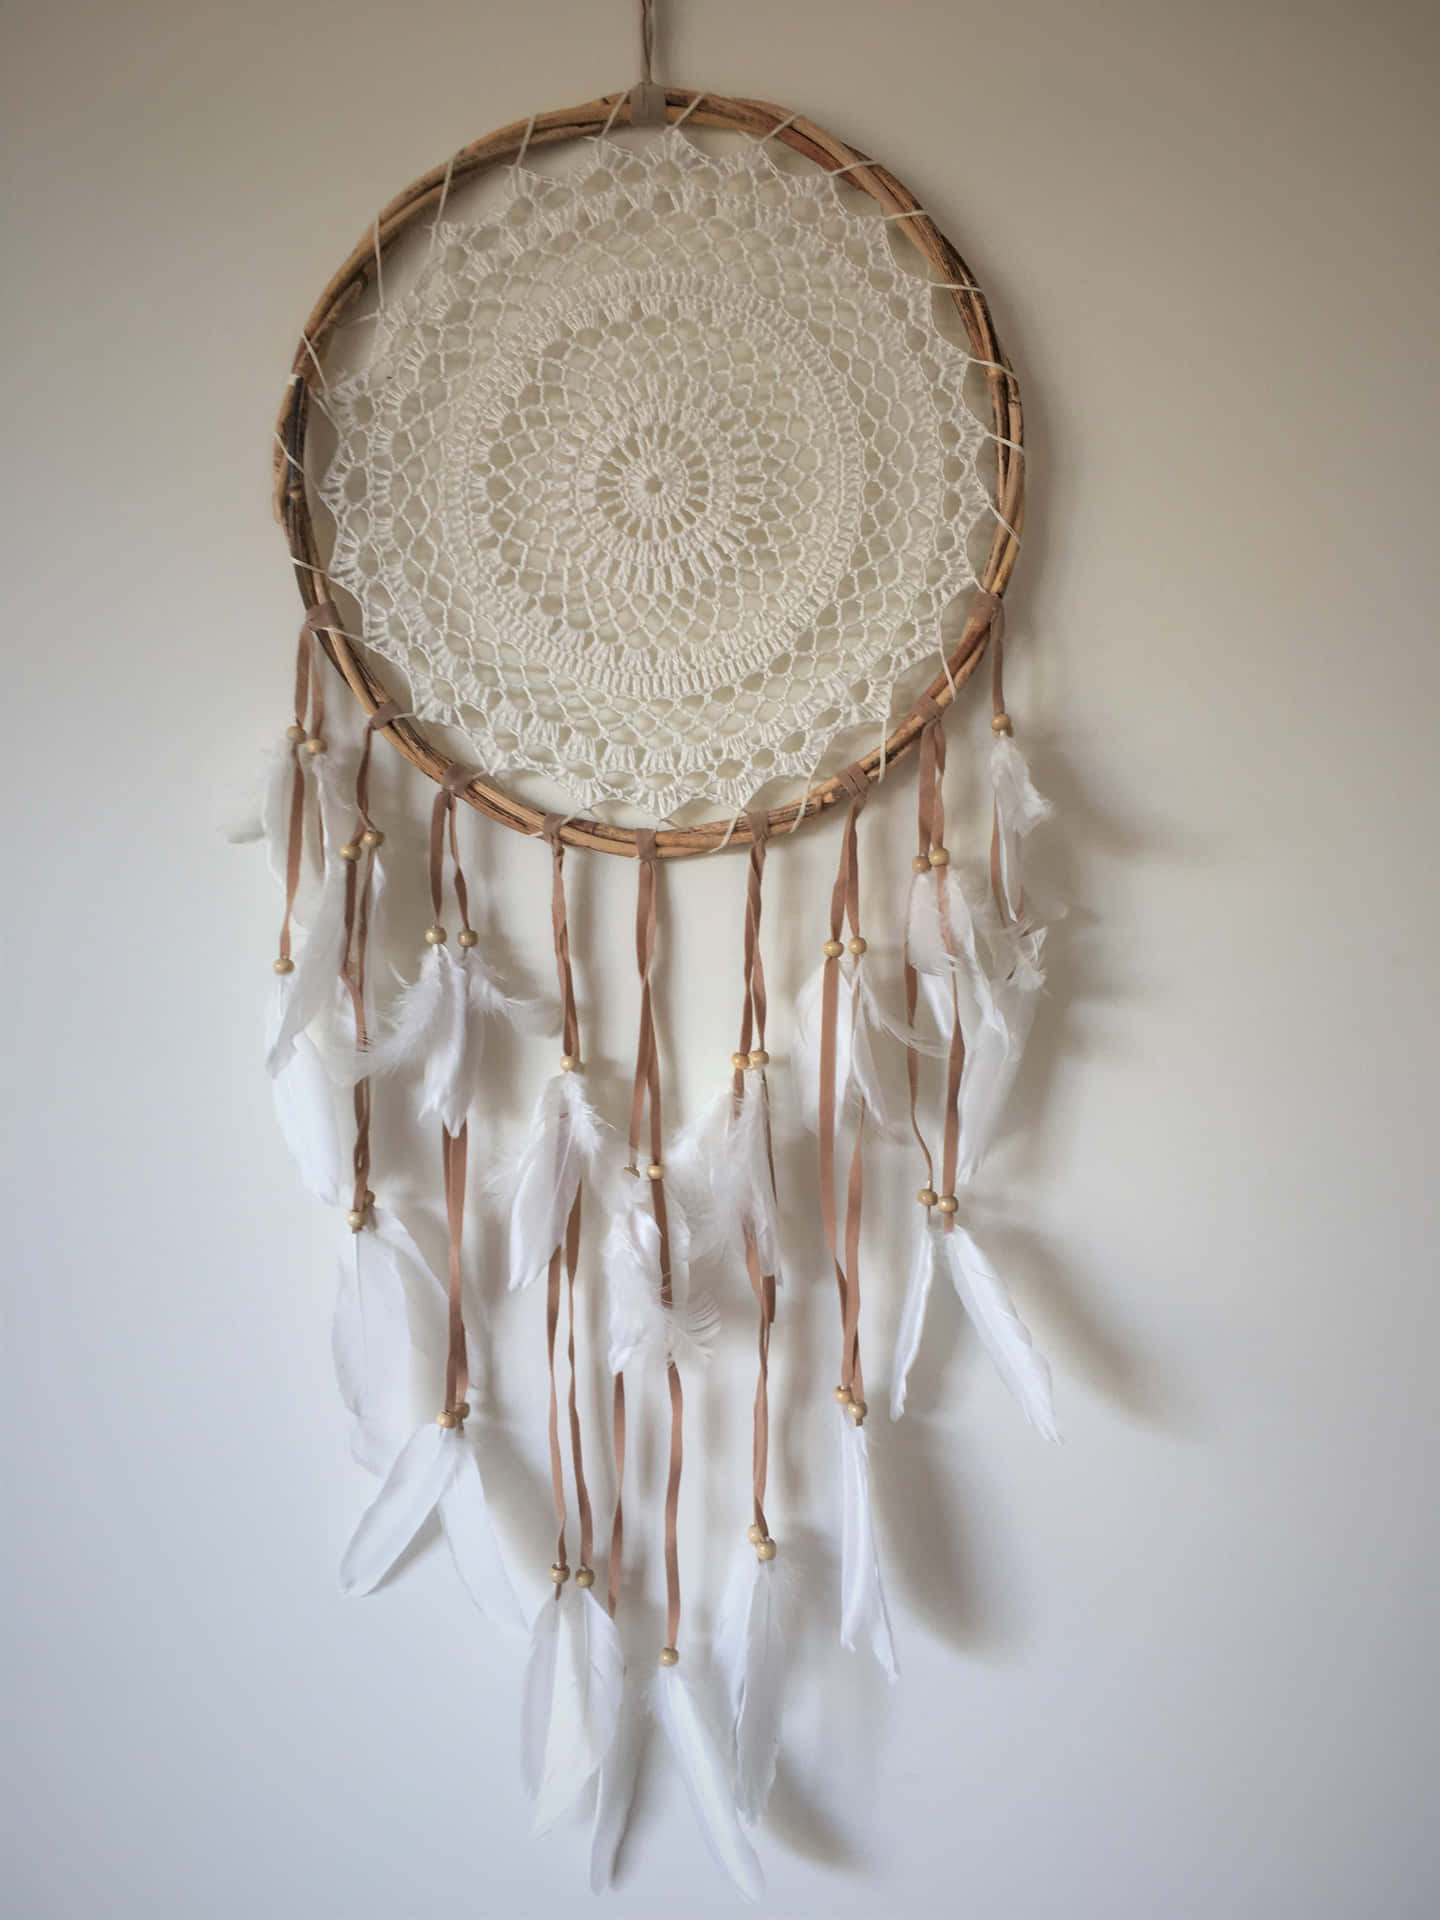 A White Dream Catcher With Feathers Hanging On The Wall